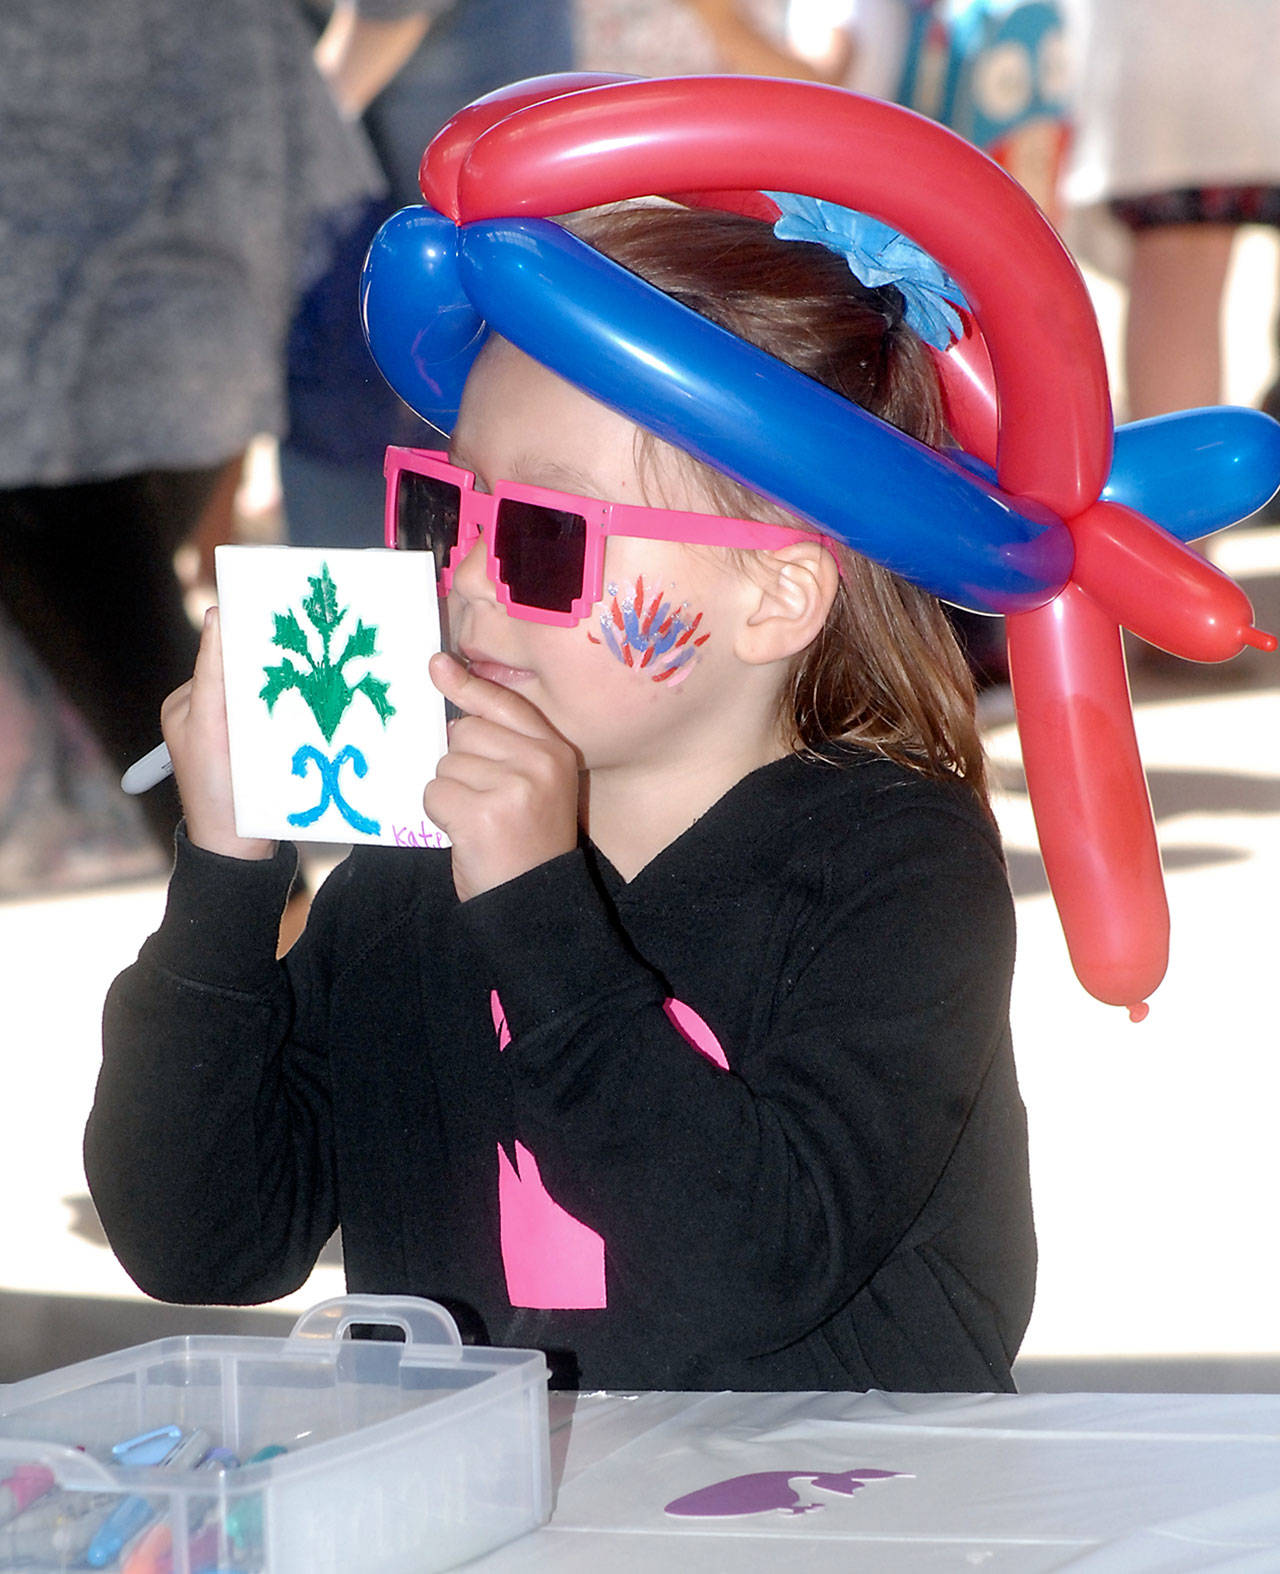 Katrina Peterson, 7, of Port Angeles shows off a ceramic tile she decorated at a kids activity center on Independence Day at The Gateway transit center pavillion in Port Angeles. (Keith Thorpe/Peninsula Daily News)